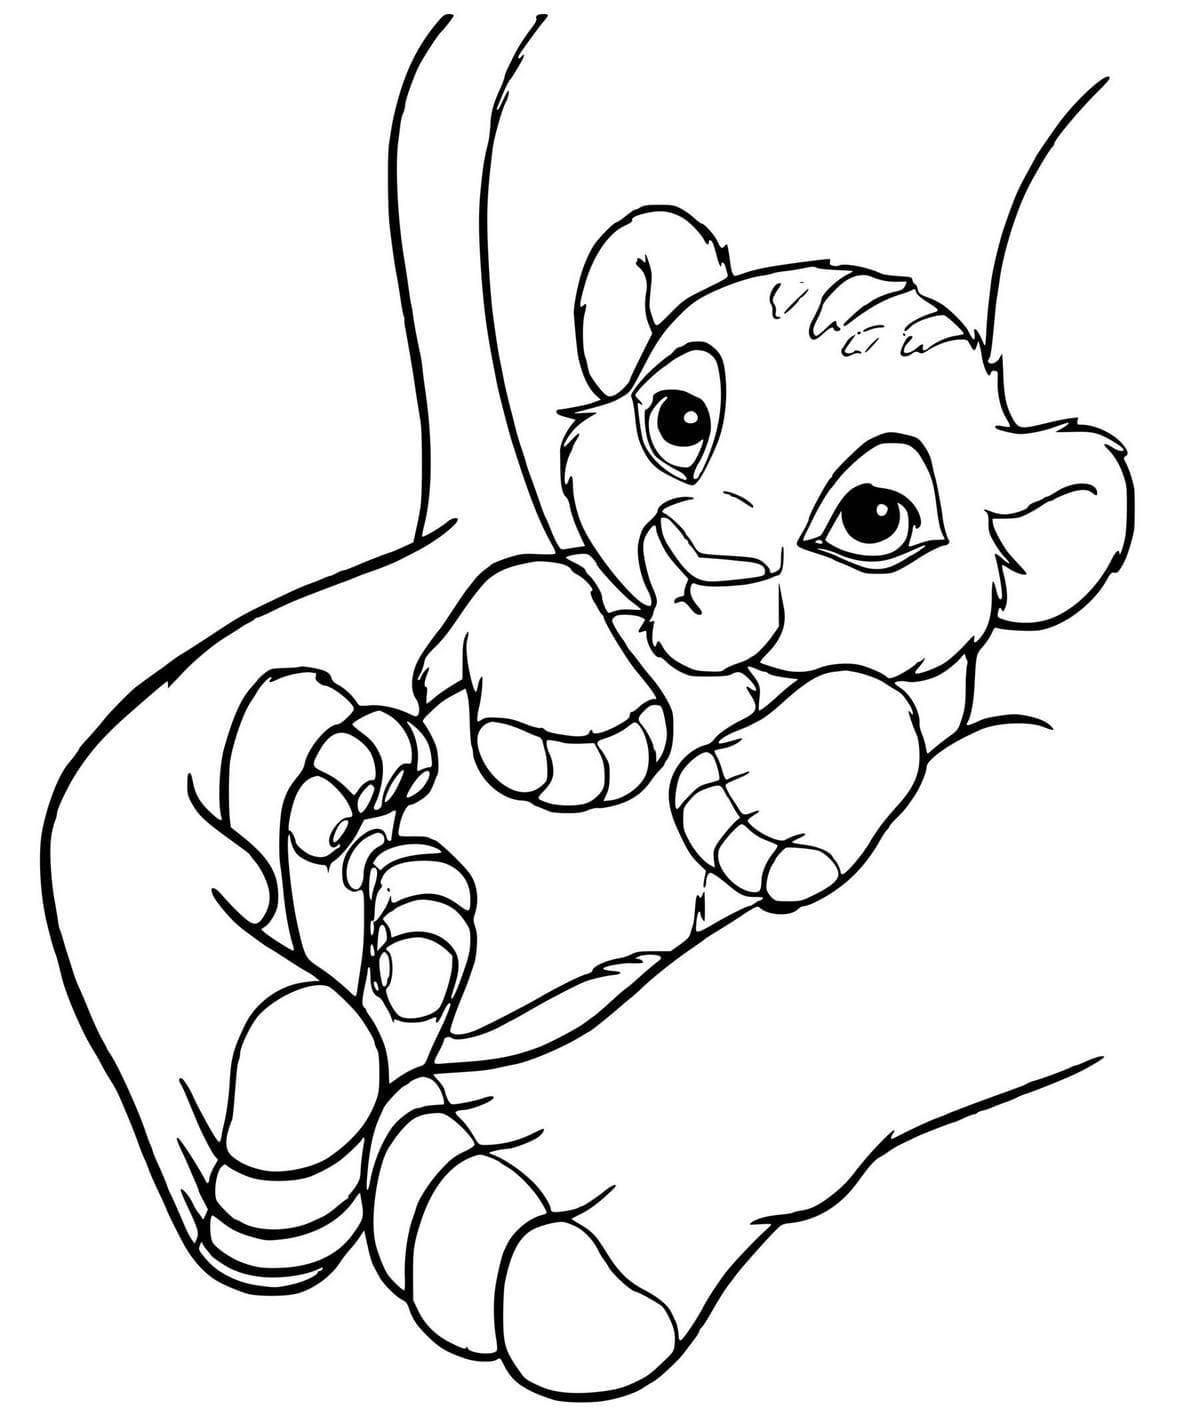 Glorious lion king coloring book